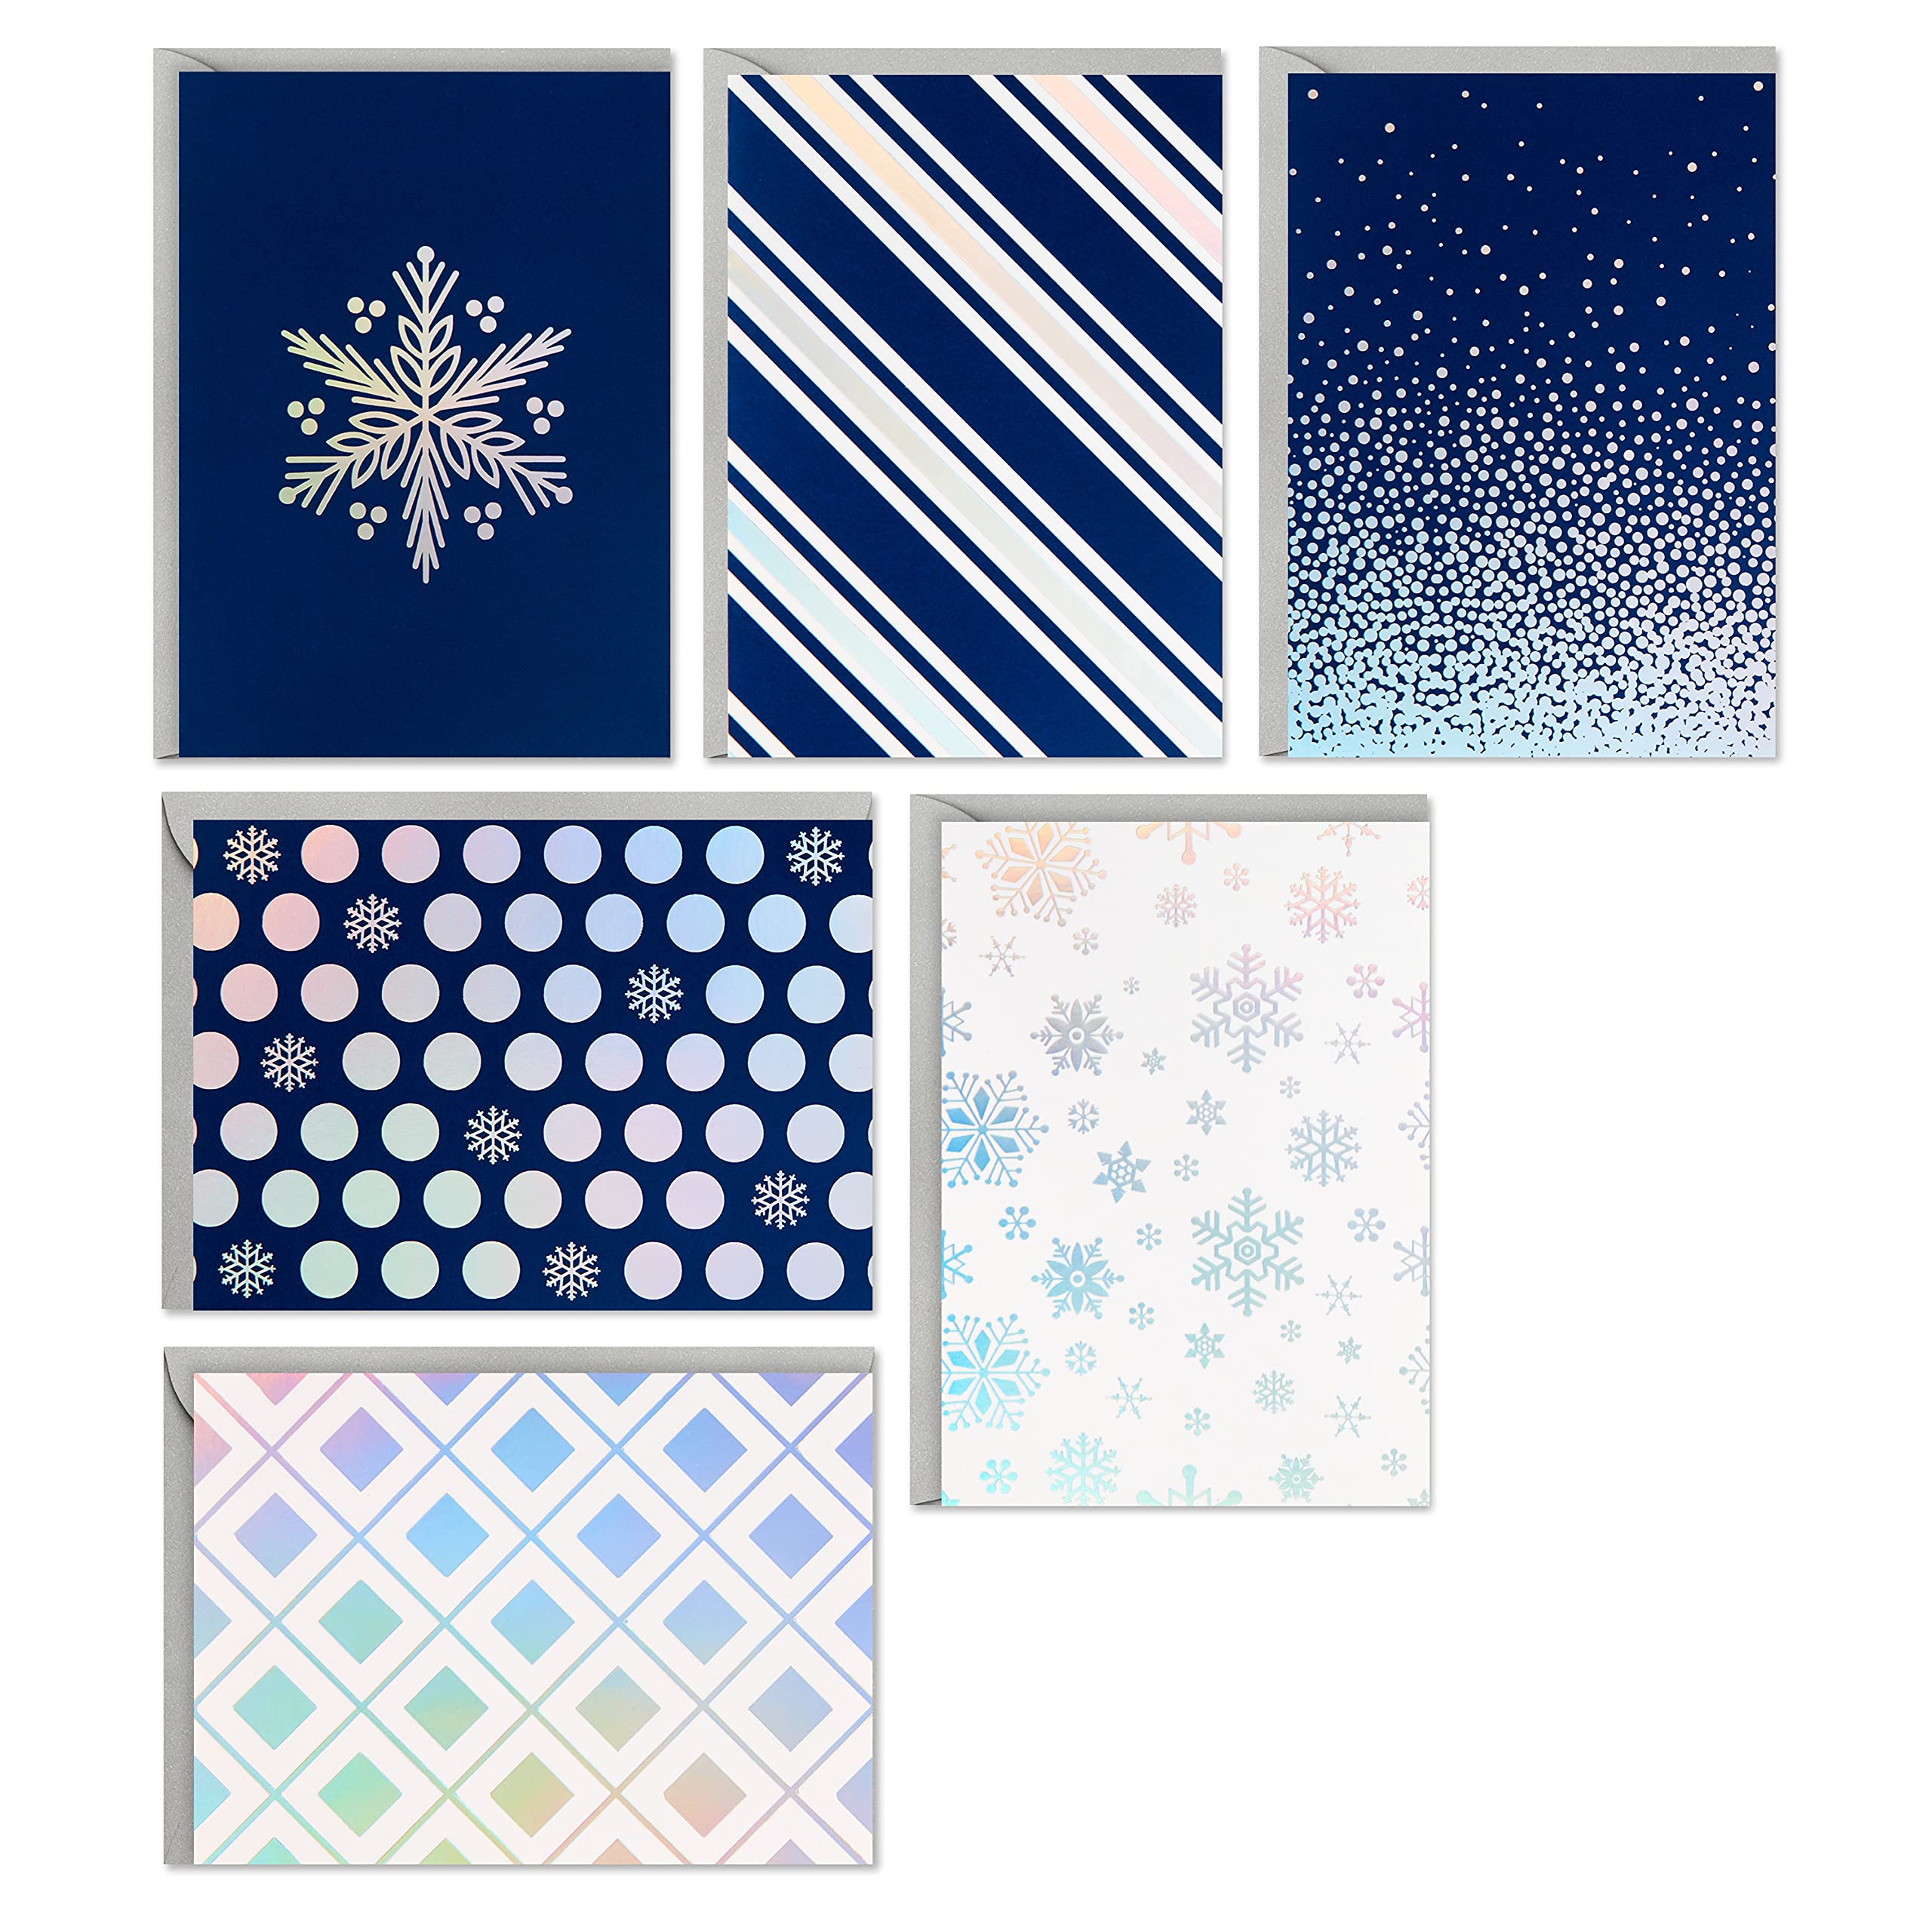 Hallmark Blank Cards, Boxed Holiday Cards Assortment (Snowflakes, 24 Cards and Envelopes),Blue Designs,5CZE1036